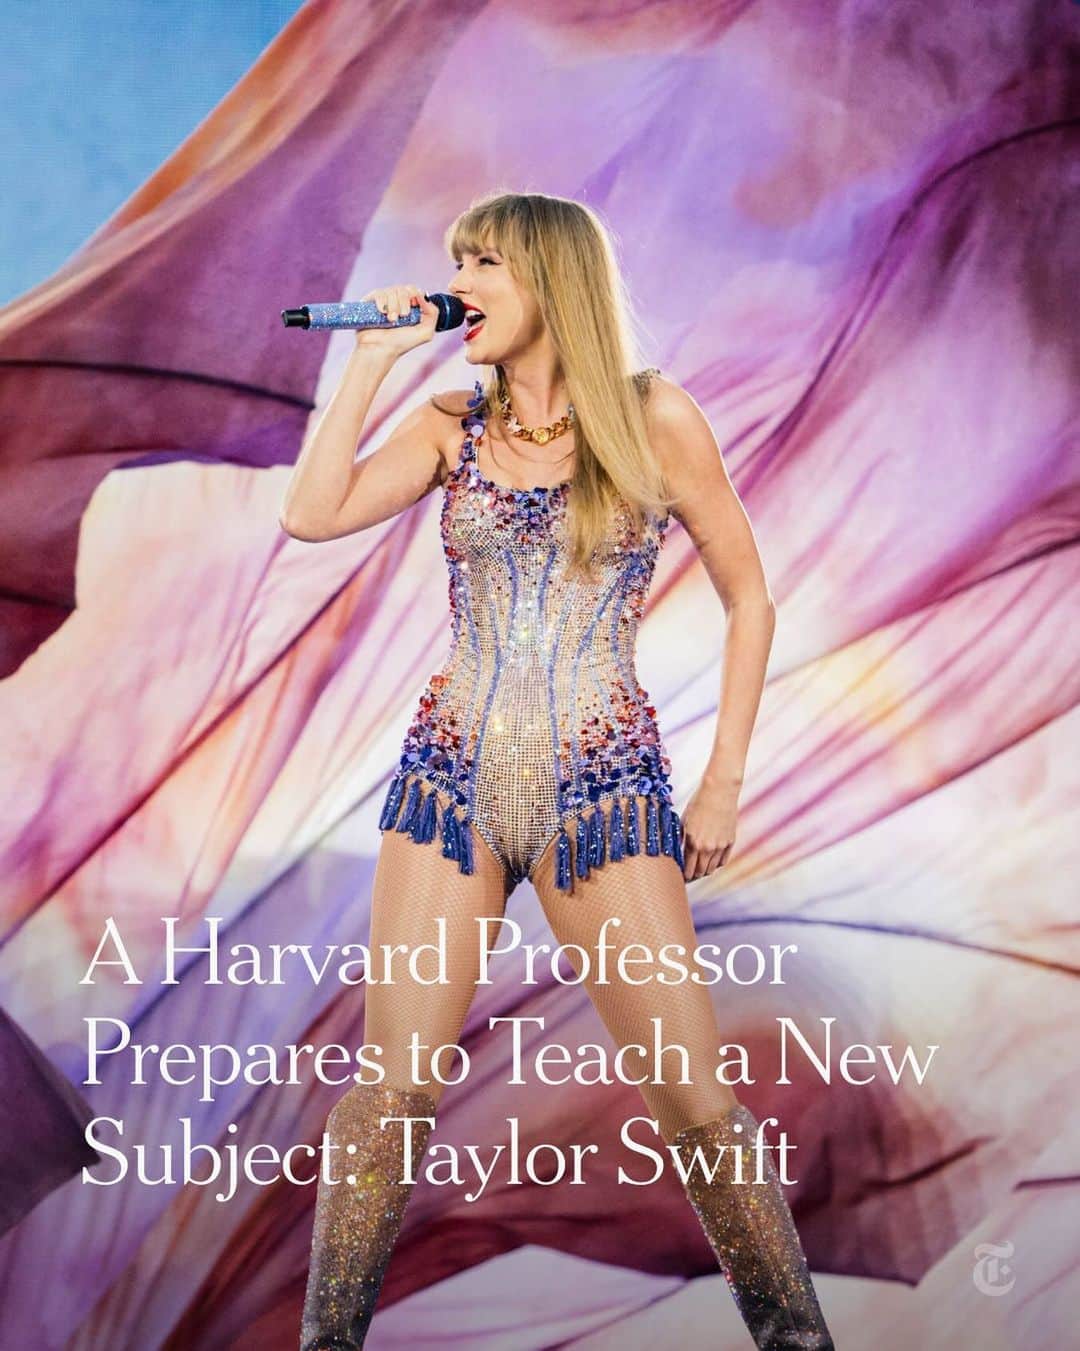 New York Times Fashionのインスタグラム：「Nearly 300 Harvard students have signed up for a new English class, “Taylor Swift and Her World.” In the spring semester, Professor Stephanie Burt will explore Swift's catalog and pair it with bodies of work from other people, from poet William Wordsworth to contemporary authors like Zan Romanoff.  “If you’re going to teach people to love something that they see as obscure or distant or difficult or unfamiliar, your best shot at doing that honestly and effectively is to connect it to something that people already like,” Burt said in an interview with The New York Times.   Tap the link in our bio to read @4evrmalone’s full interview with Burt and get a look into what exactly her students will be studying. Photo by @poupayphoto」